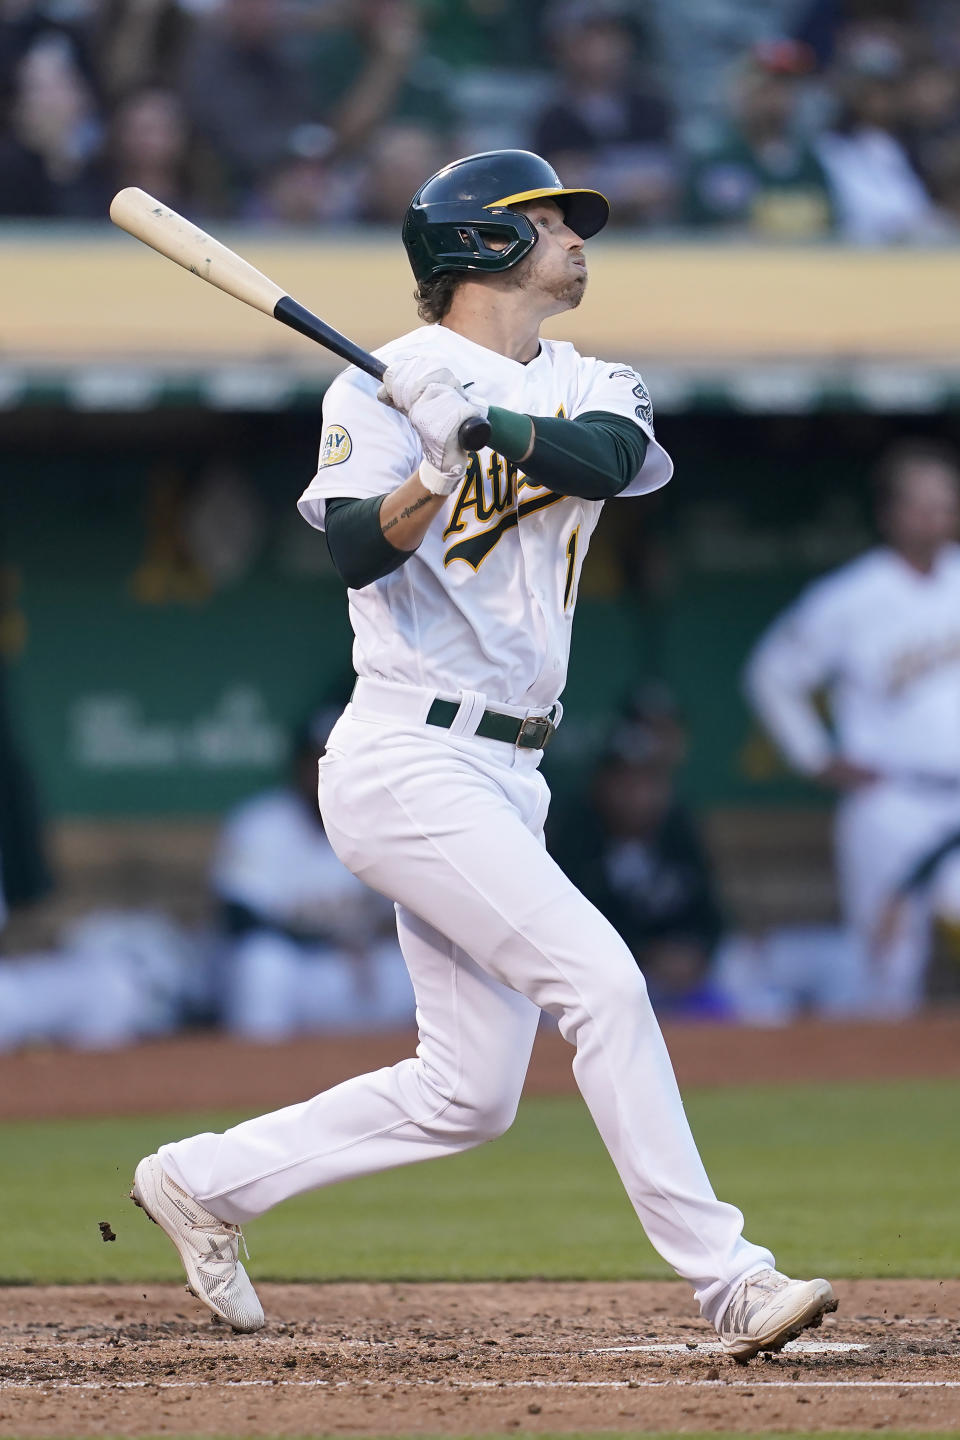 Oakland Athletics' Skye Bolt watches his two-run home run against the Houston Astros during the fourth inning of a baseball game in Oakland, Calif., Monday, July 25, 2022. (AP Photo/Jeff Chiu)